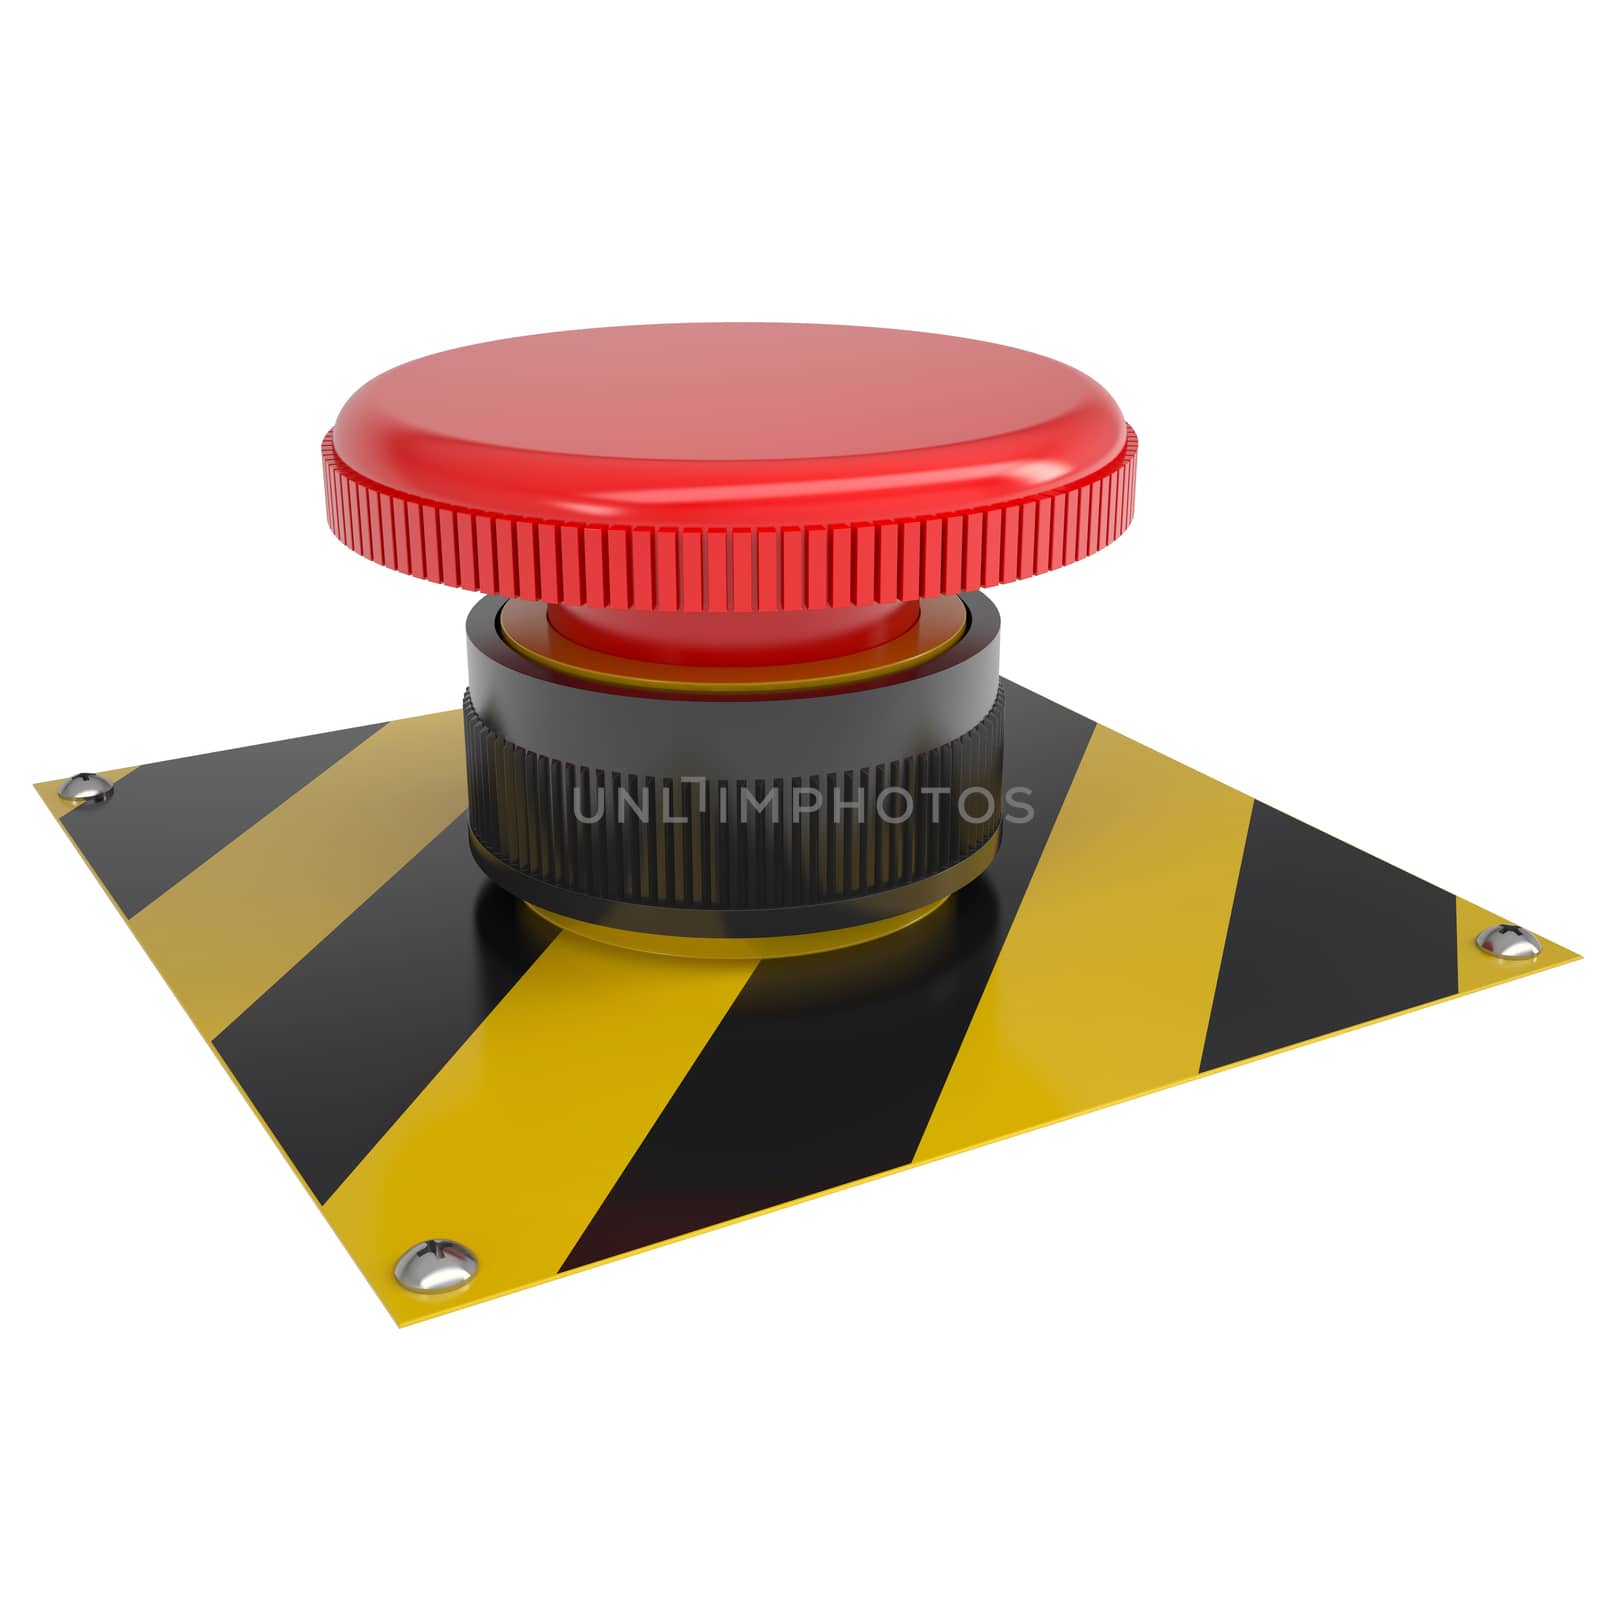 The red button on the base. Isolated render on a white background